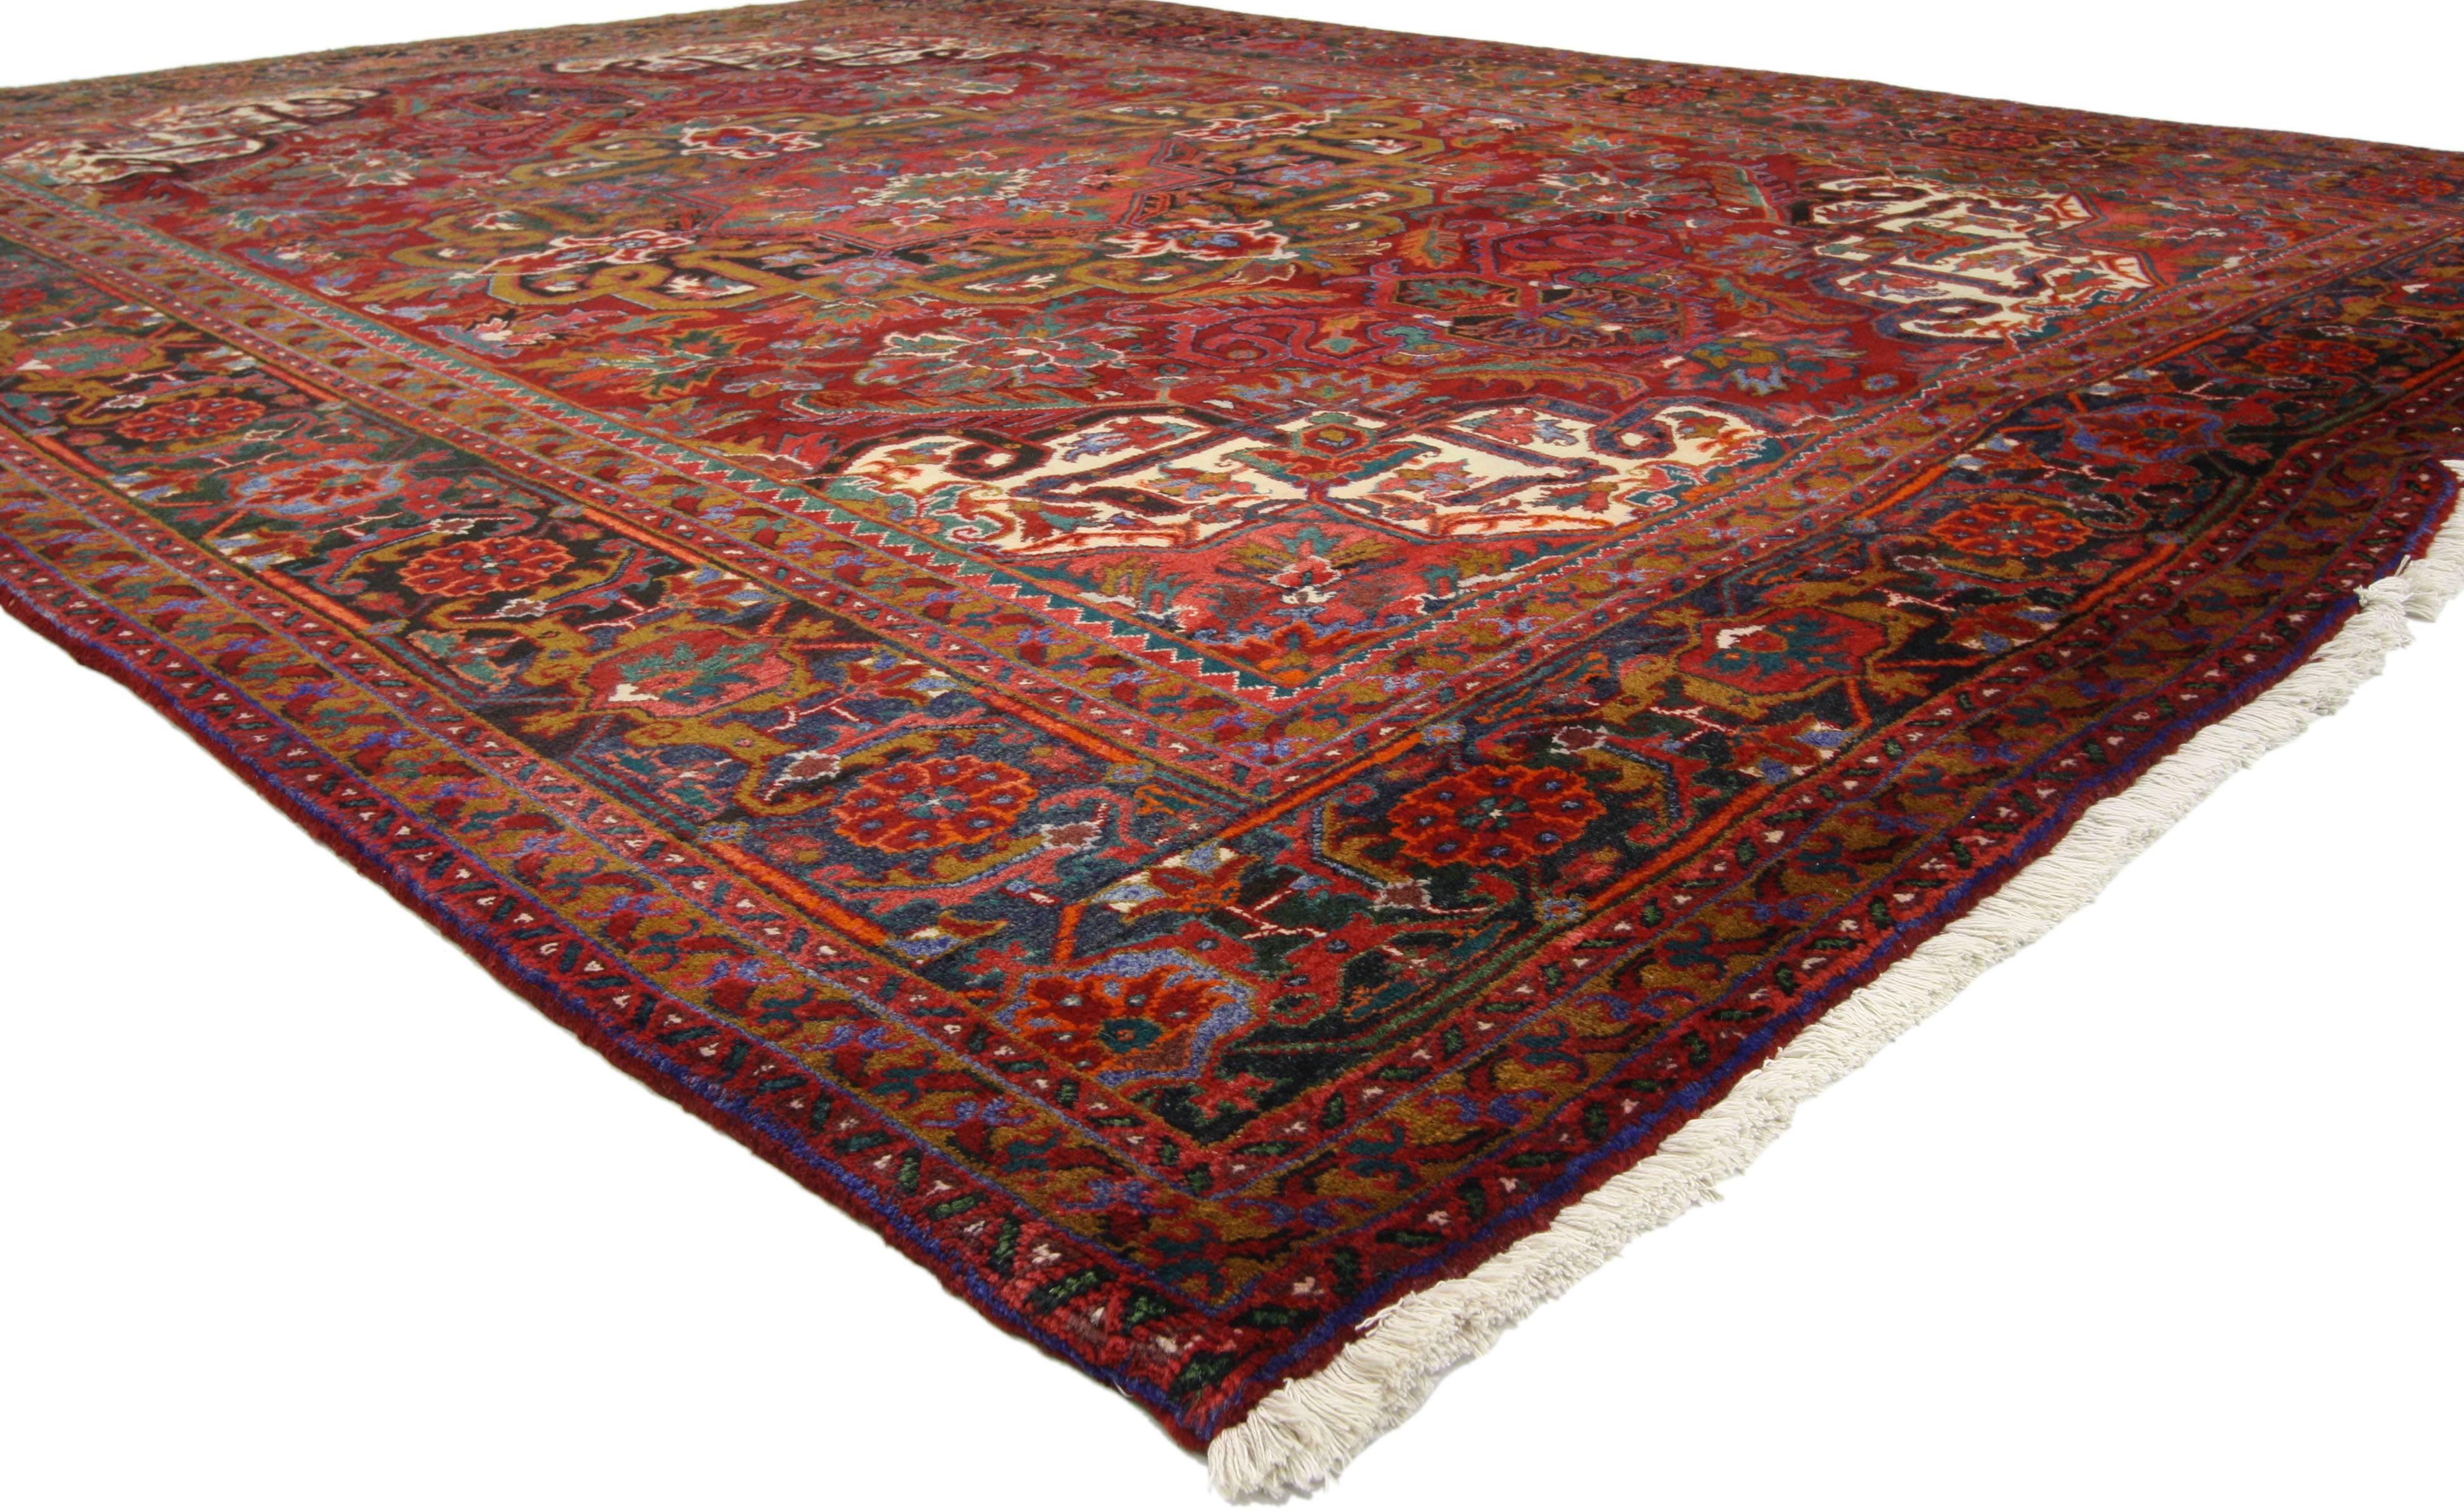 76234, vintage Persian Heriz rug with traditional style. Full of character and stately presence, this hand-knotted wool vintage Persian Heriz rug features classical elements of Persian rug design and Mid-Century Modern style. This vintage Heriz rug